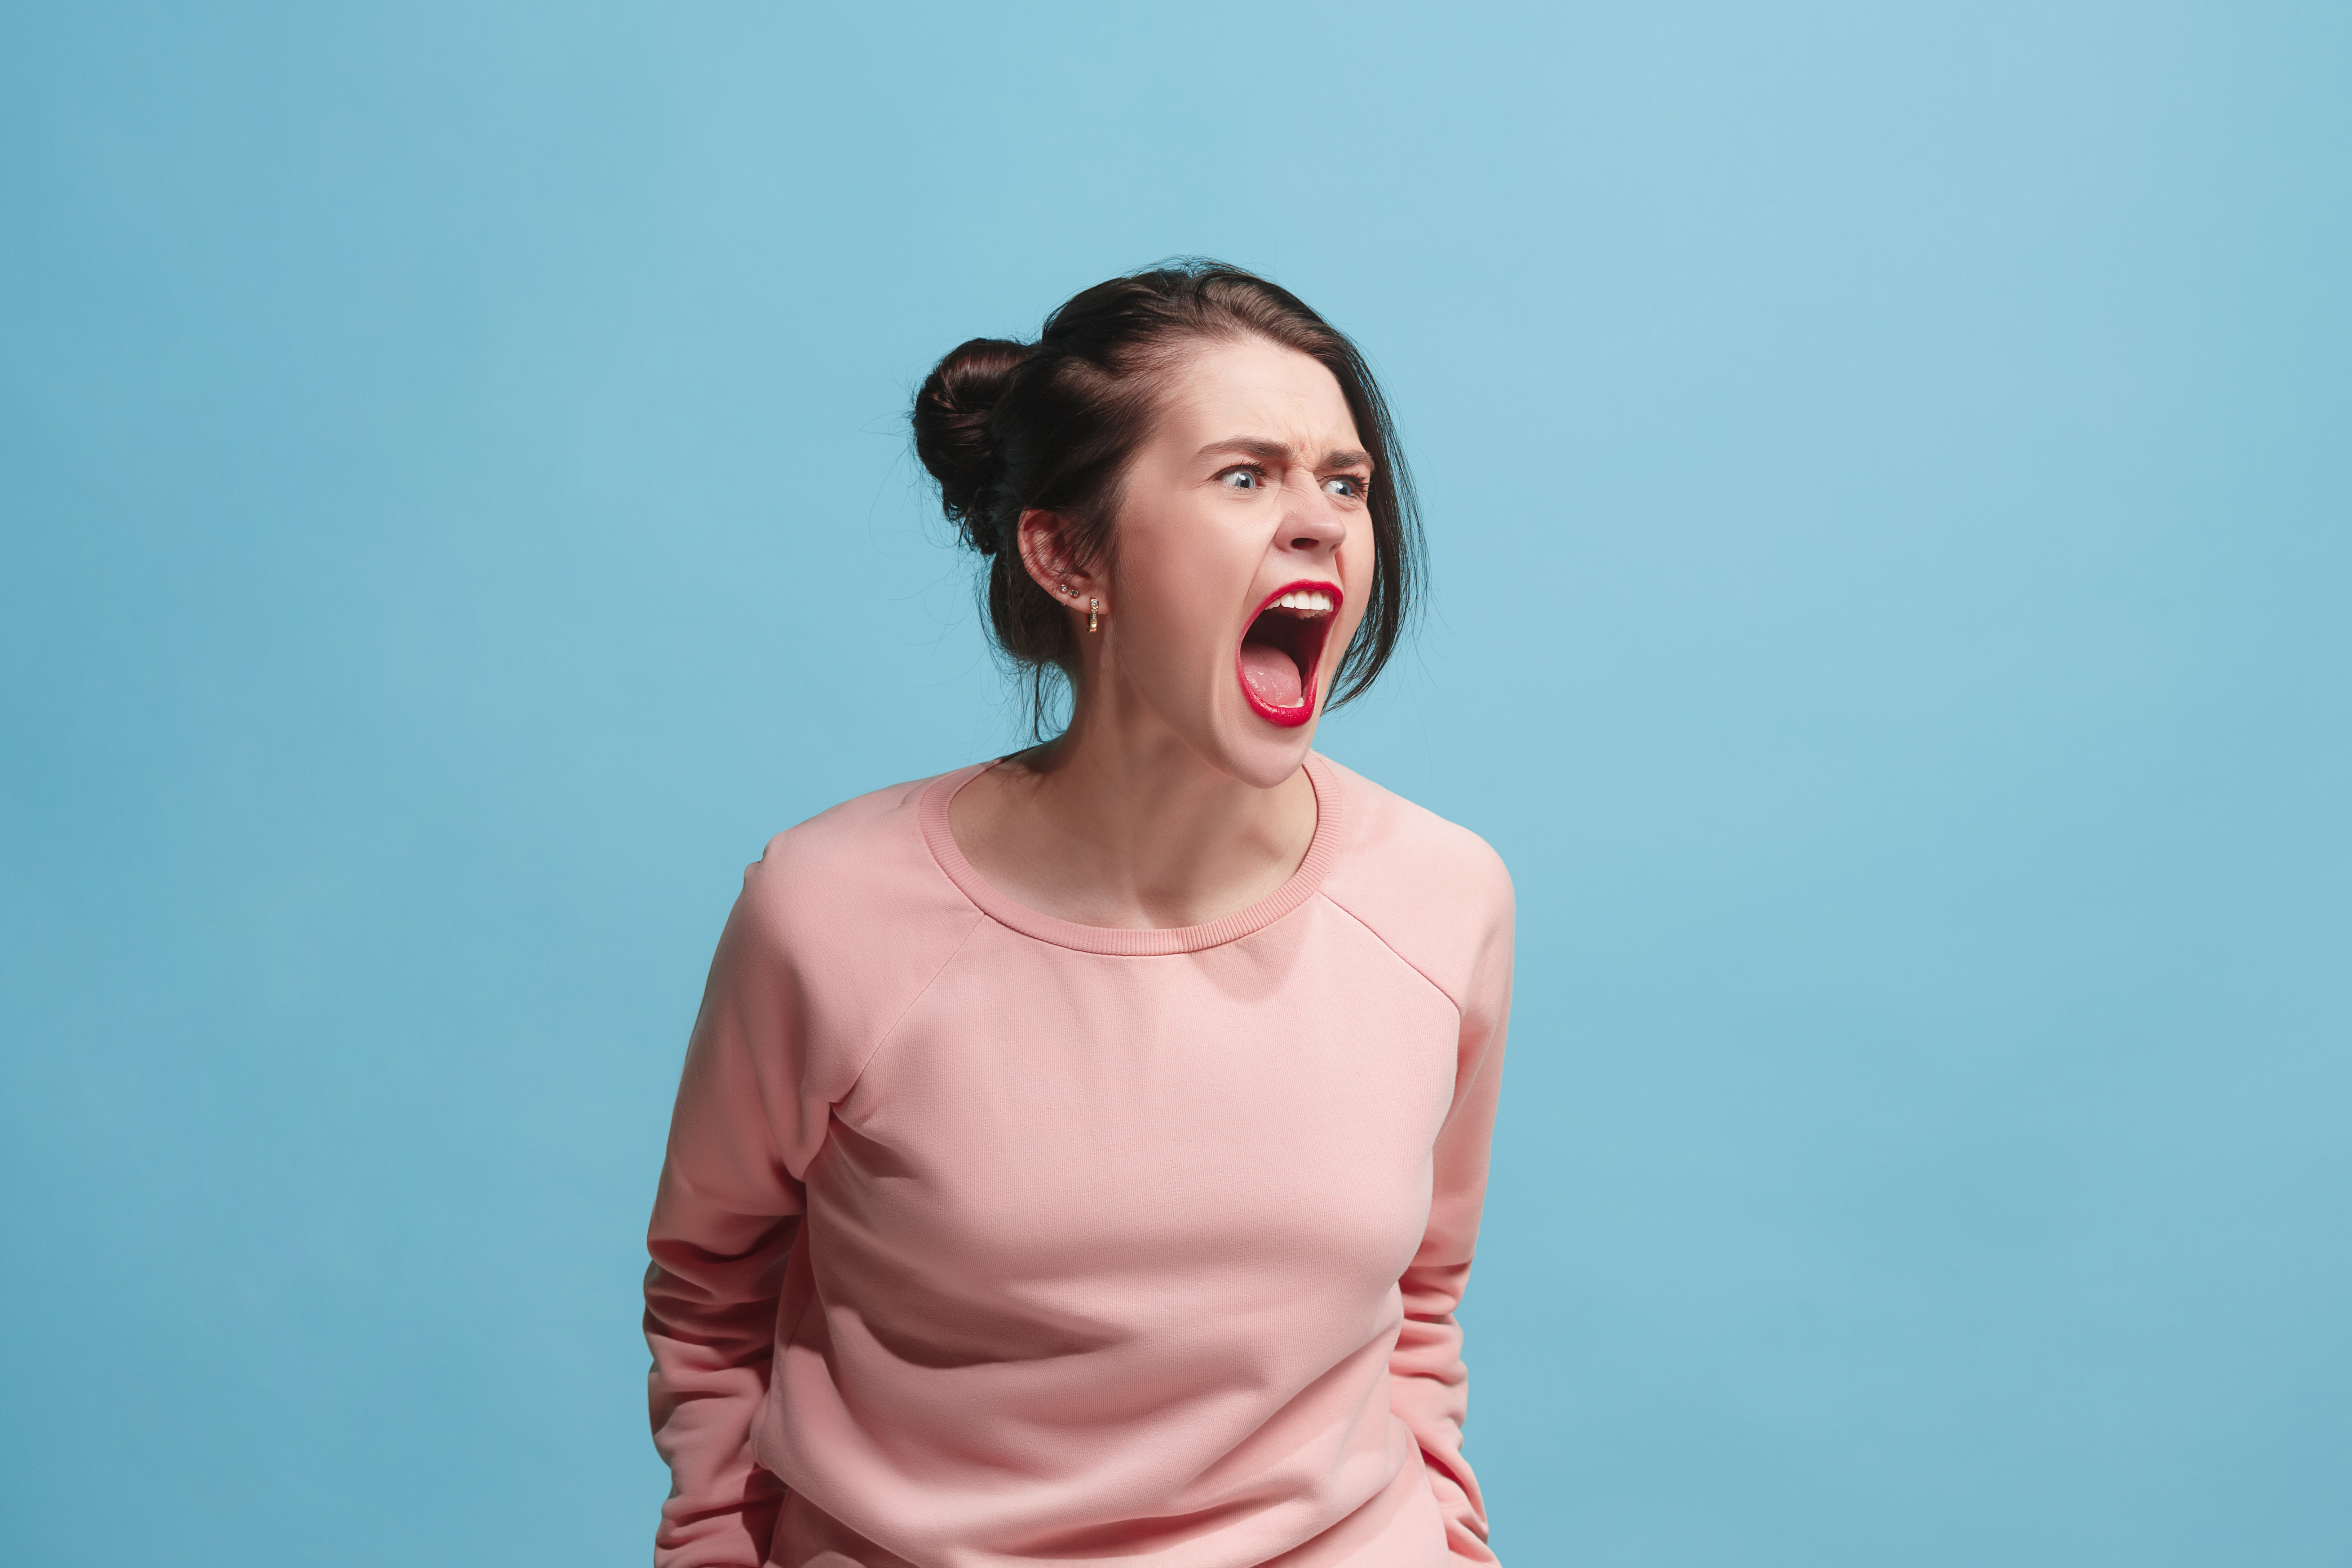 An angry woman yelling | Source: Shutterstock